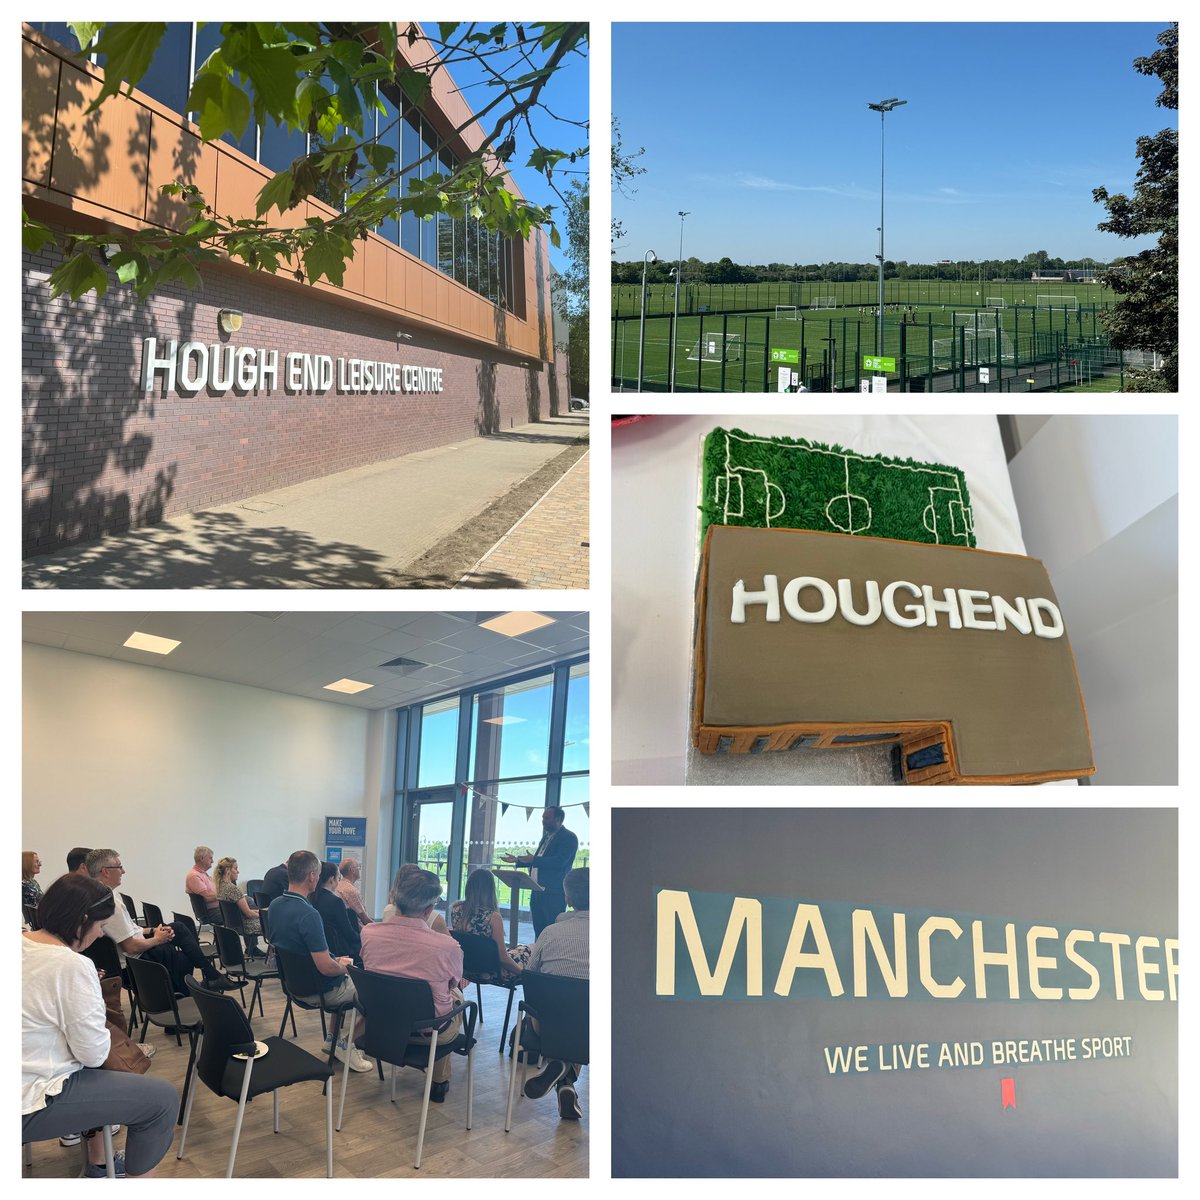 Great to celebrate the multi million redevelopment of Hough End Leisure Centre & Playing Fields. The largest public playing field in Manchester, a central home for amateur sport & valued asset where local people meet & communities flourish promoting health, happiness & wellbeing